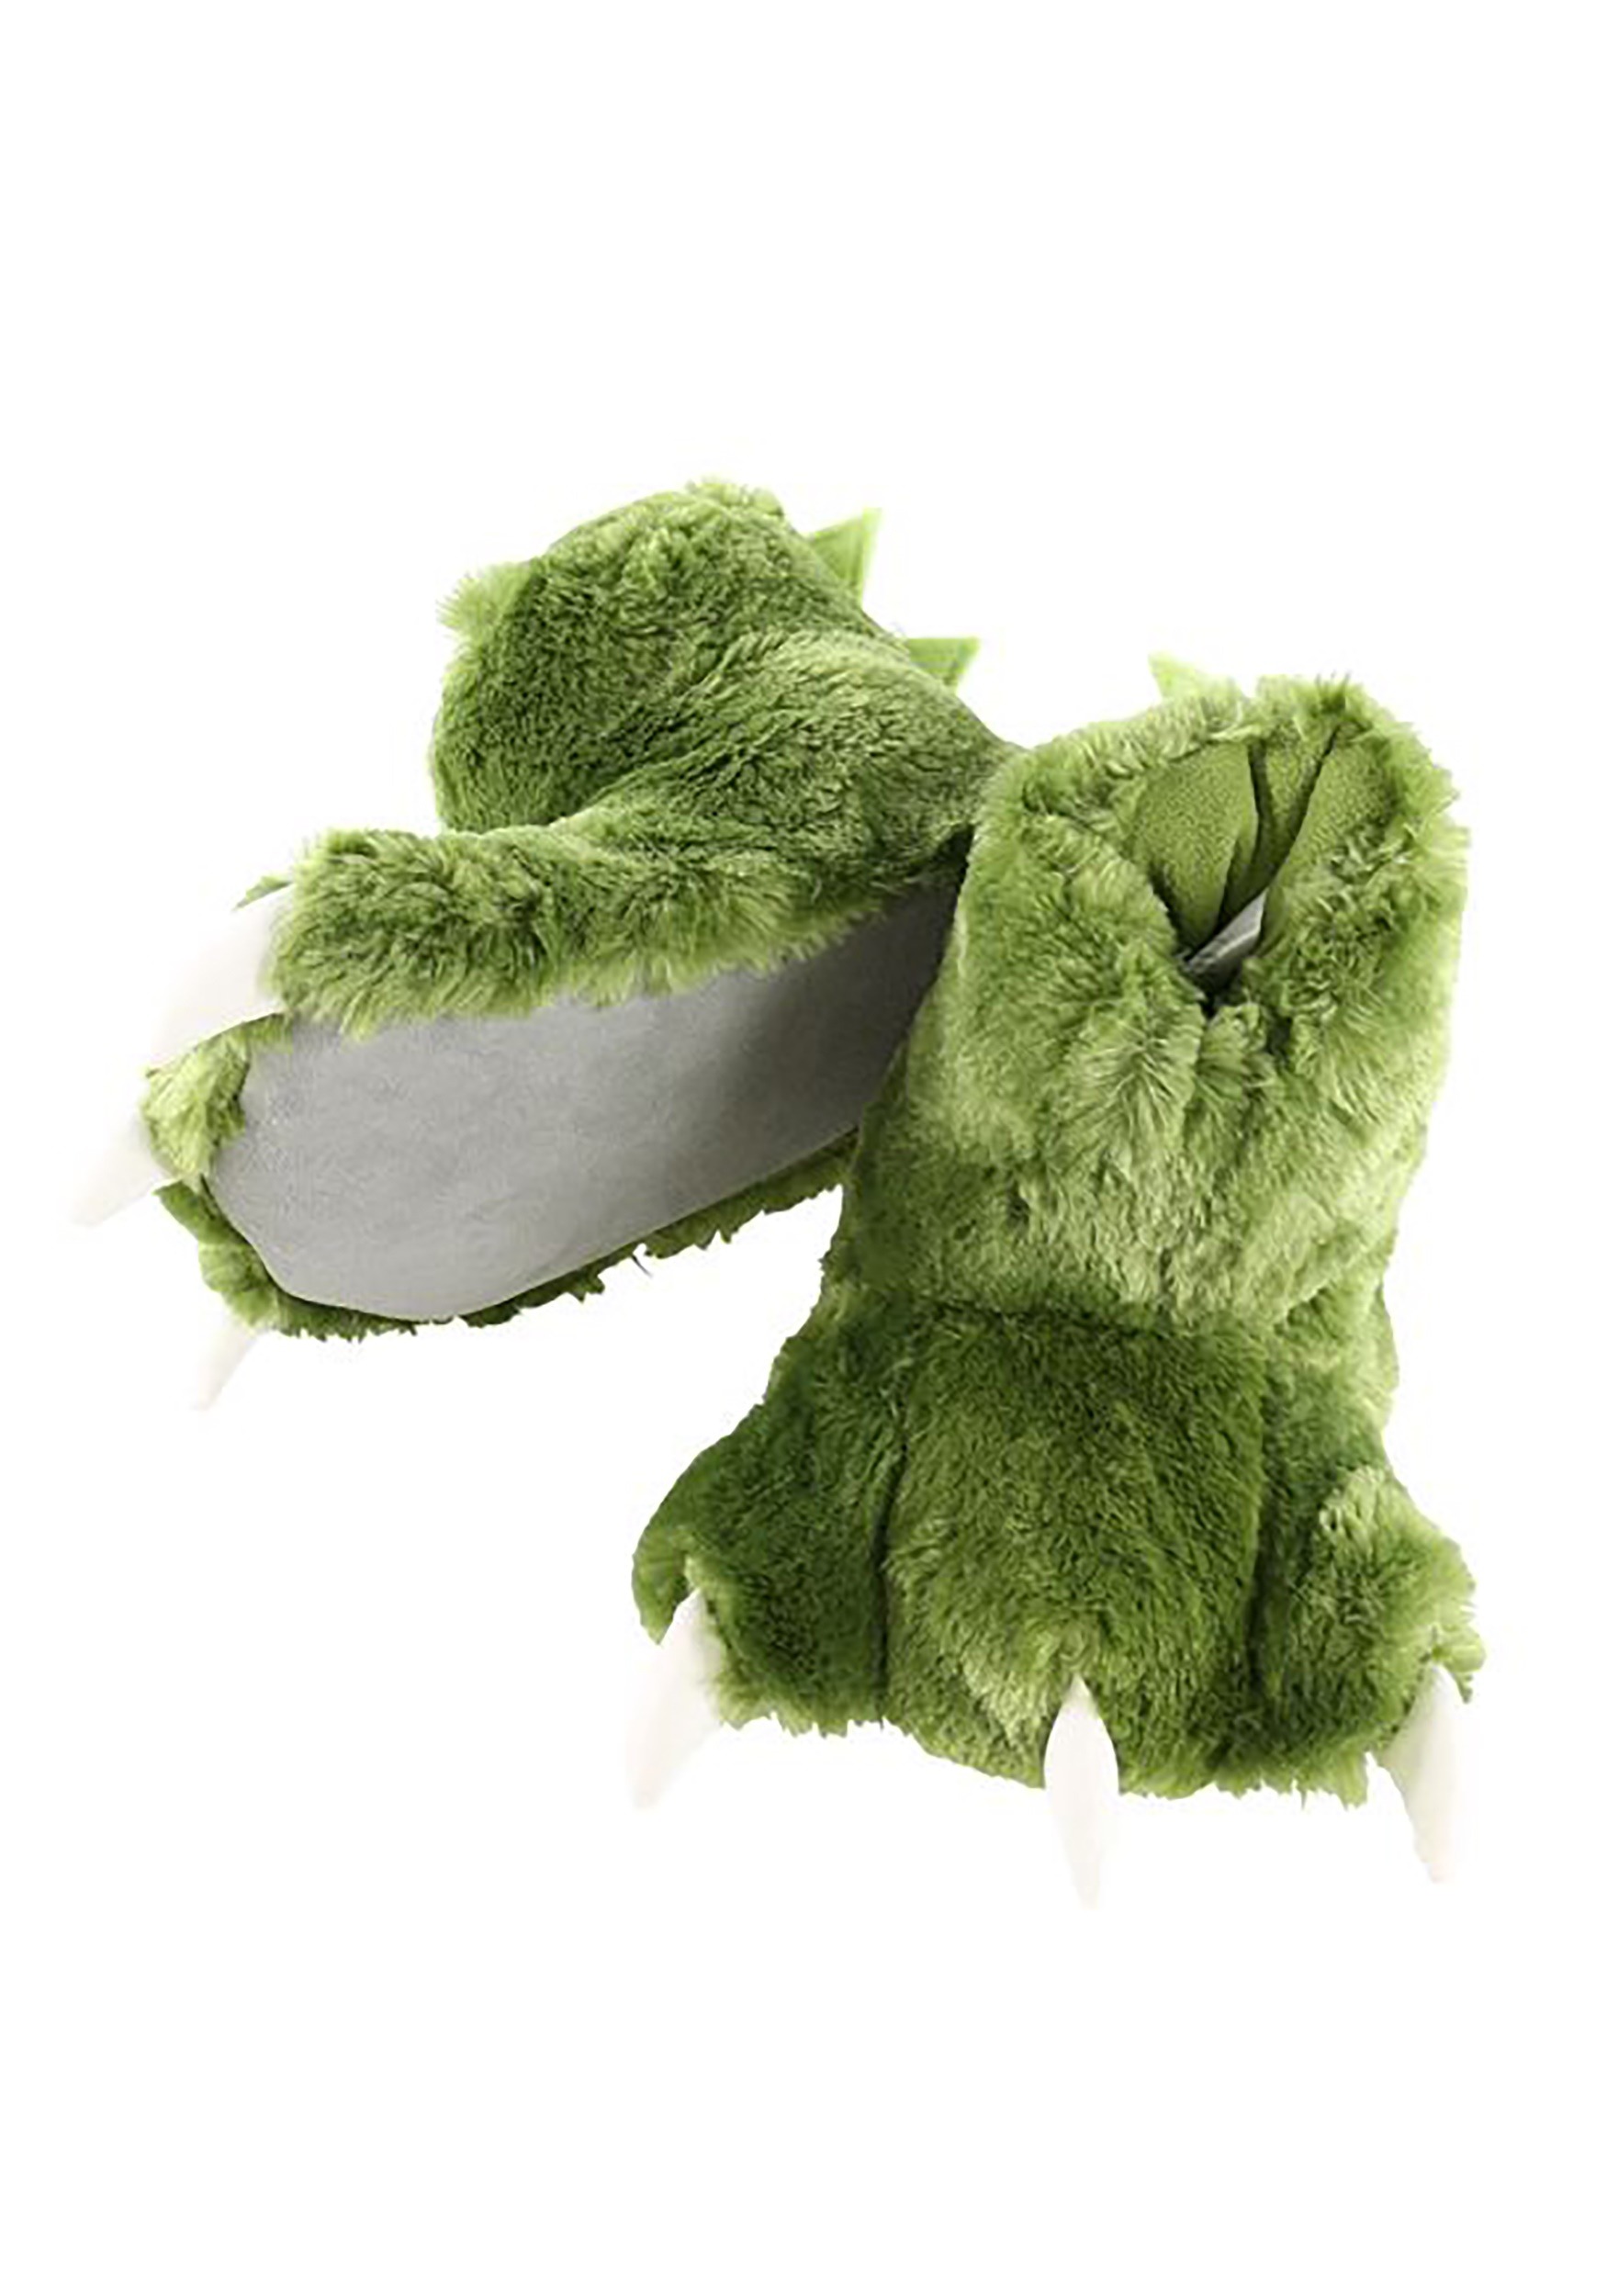 adult slippers